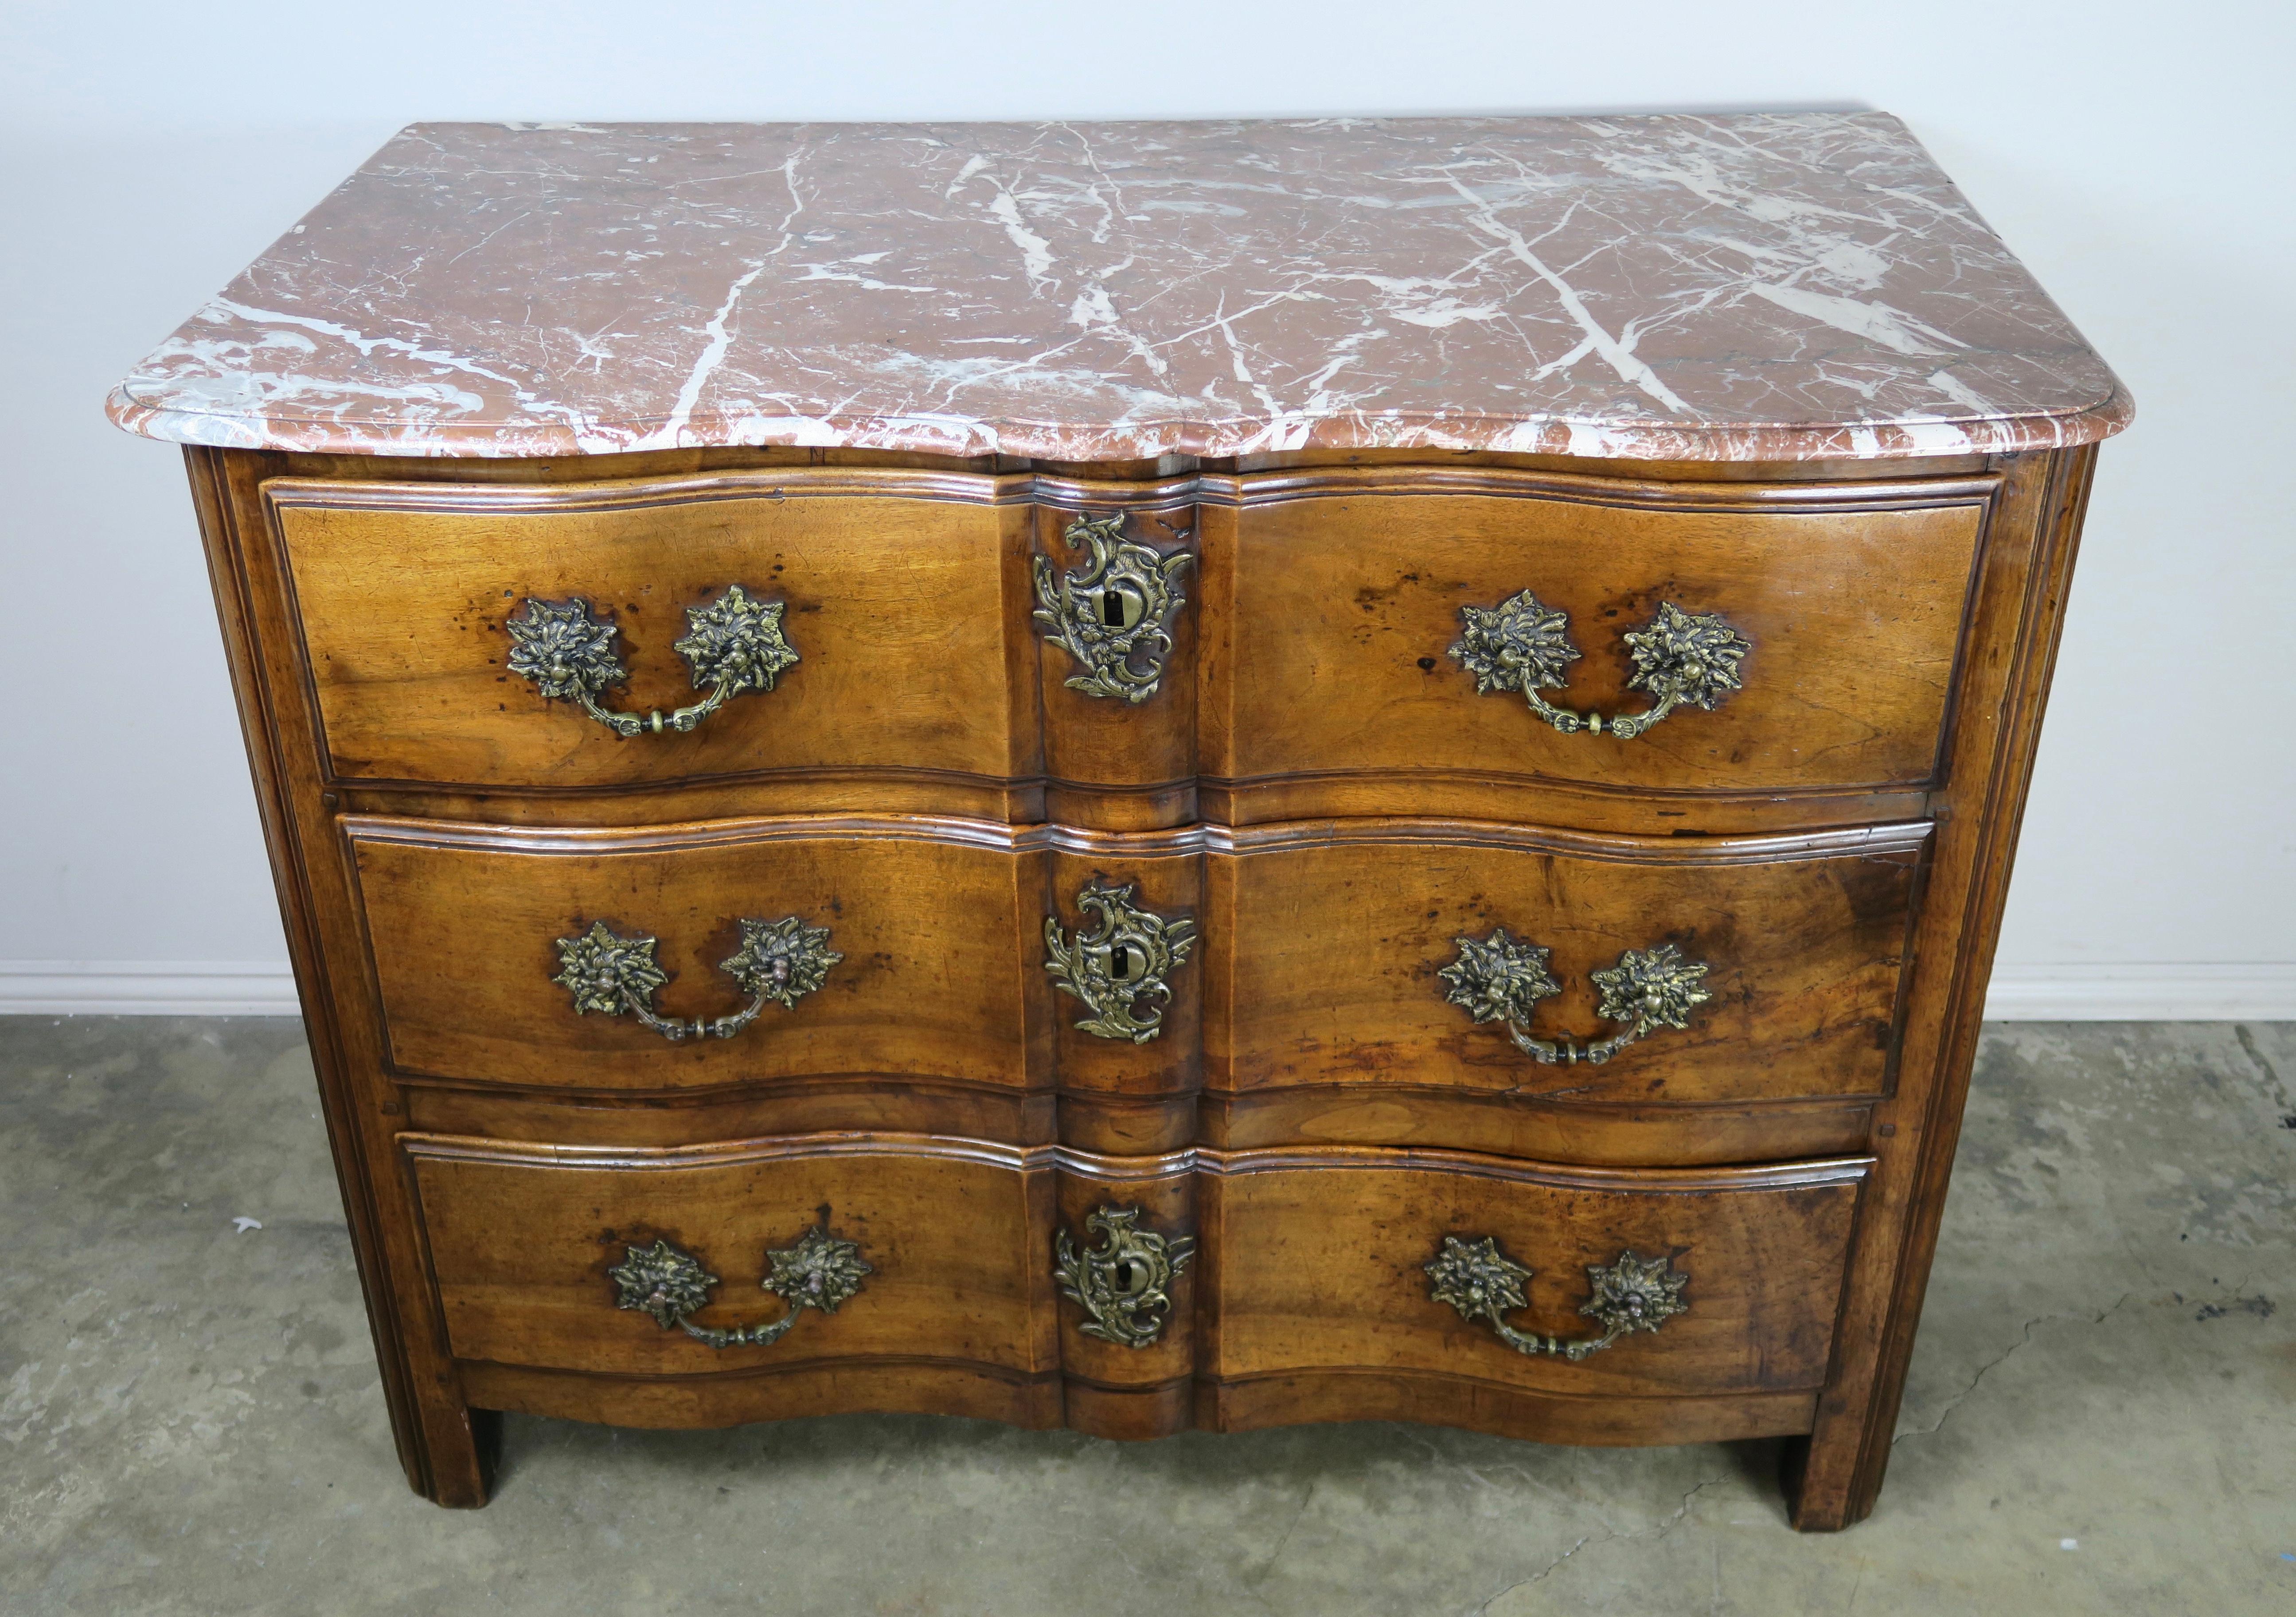 19th century walnut French 3-drawer chest with original cast bronze hardware. Original marble top with single ogee and bull nose edge detail.